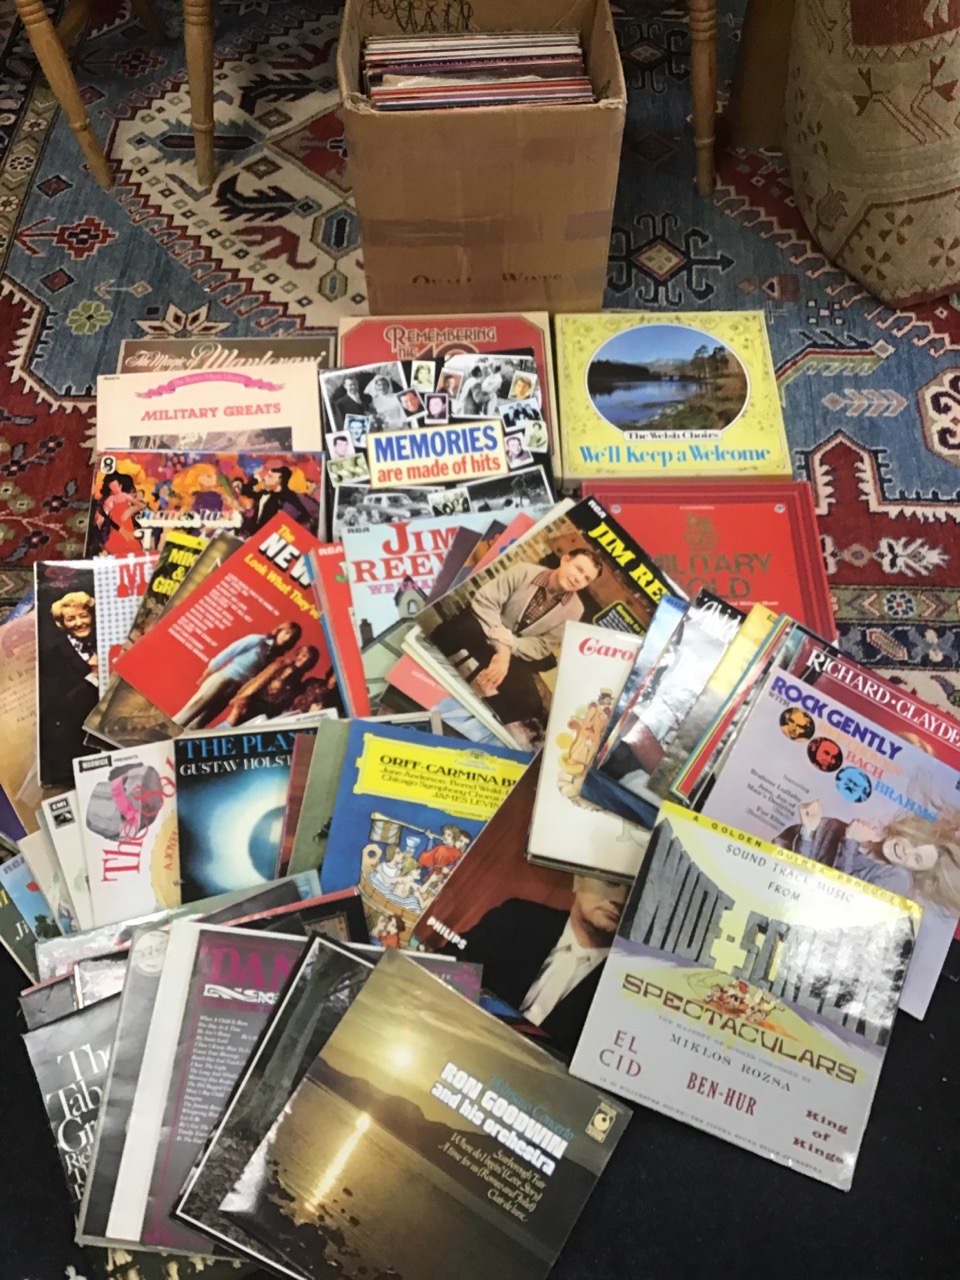 A collection of vinyl albums including easy listening, choral, popular, classical, military bands, - Bild 2 aus 3